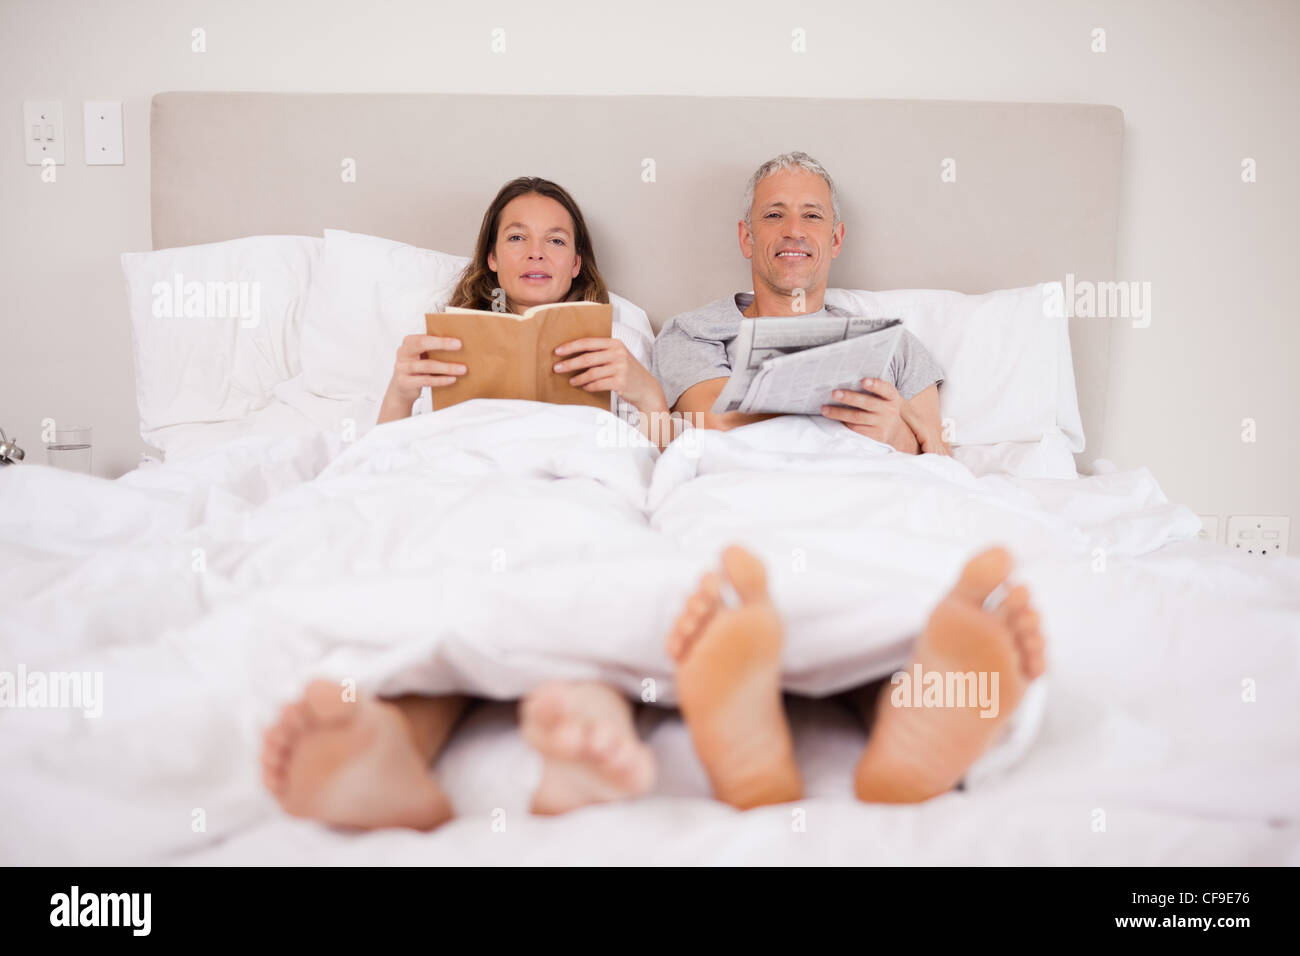 Man reading a newspaper while his wife is reading a book Stock Photo